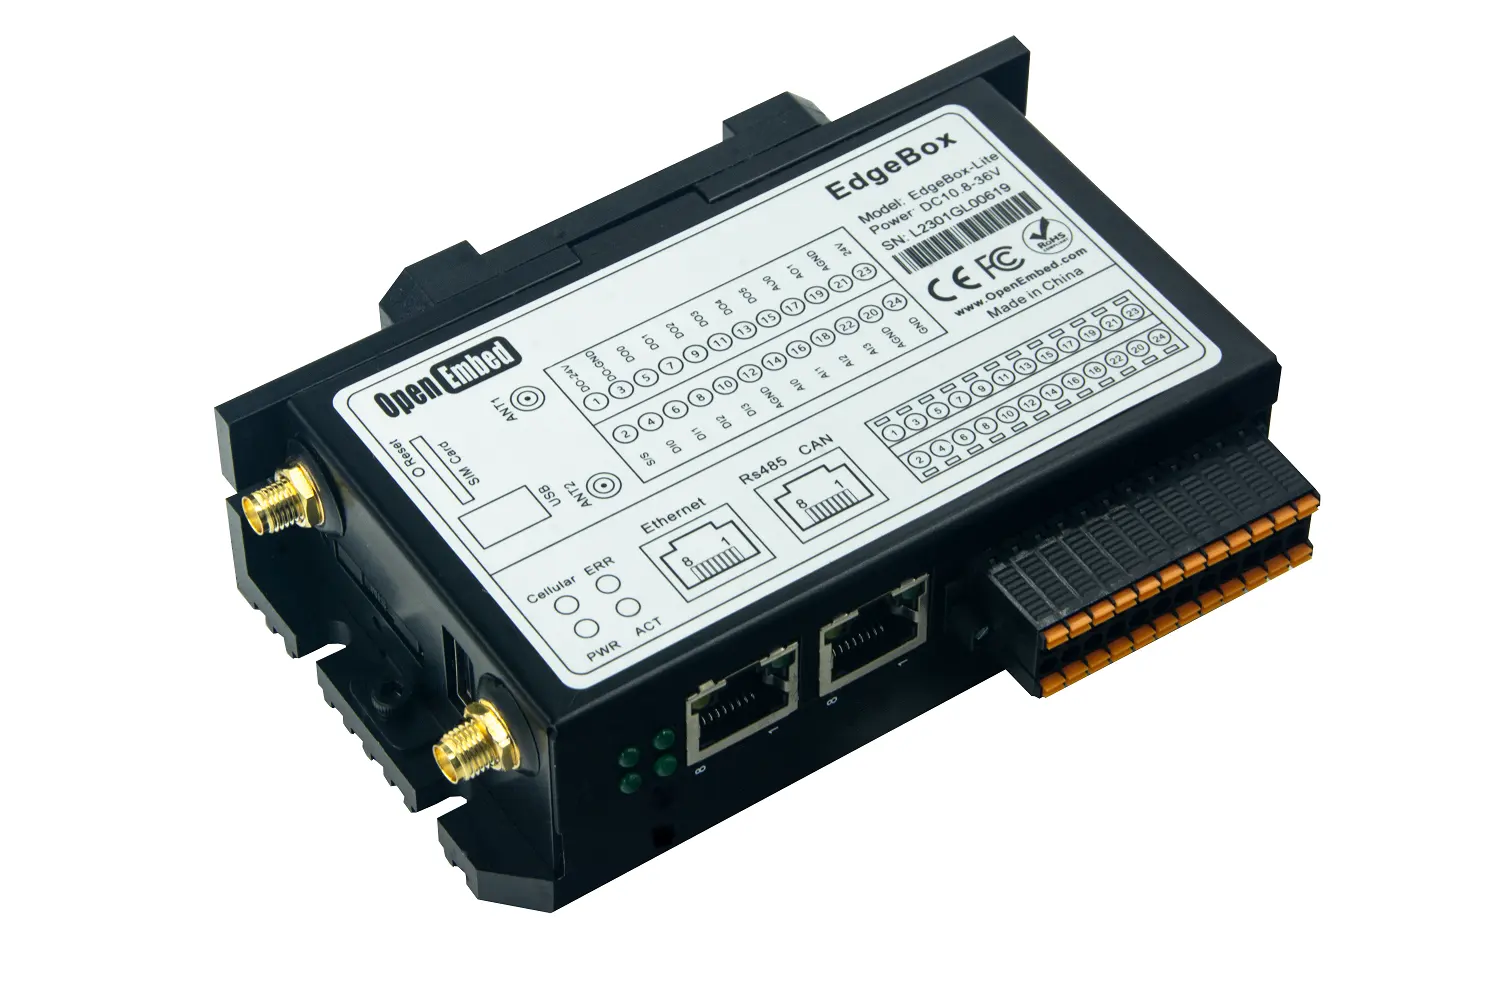 Reduced labor  remote control  real-time data update transmission. Easy to operate  affordable industrial automation controller